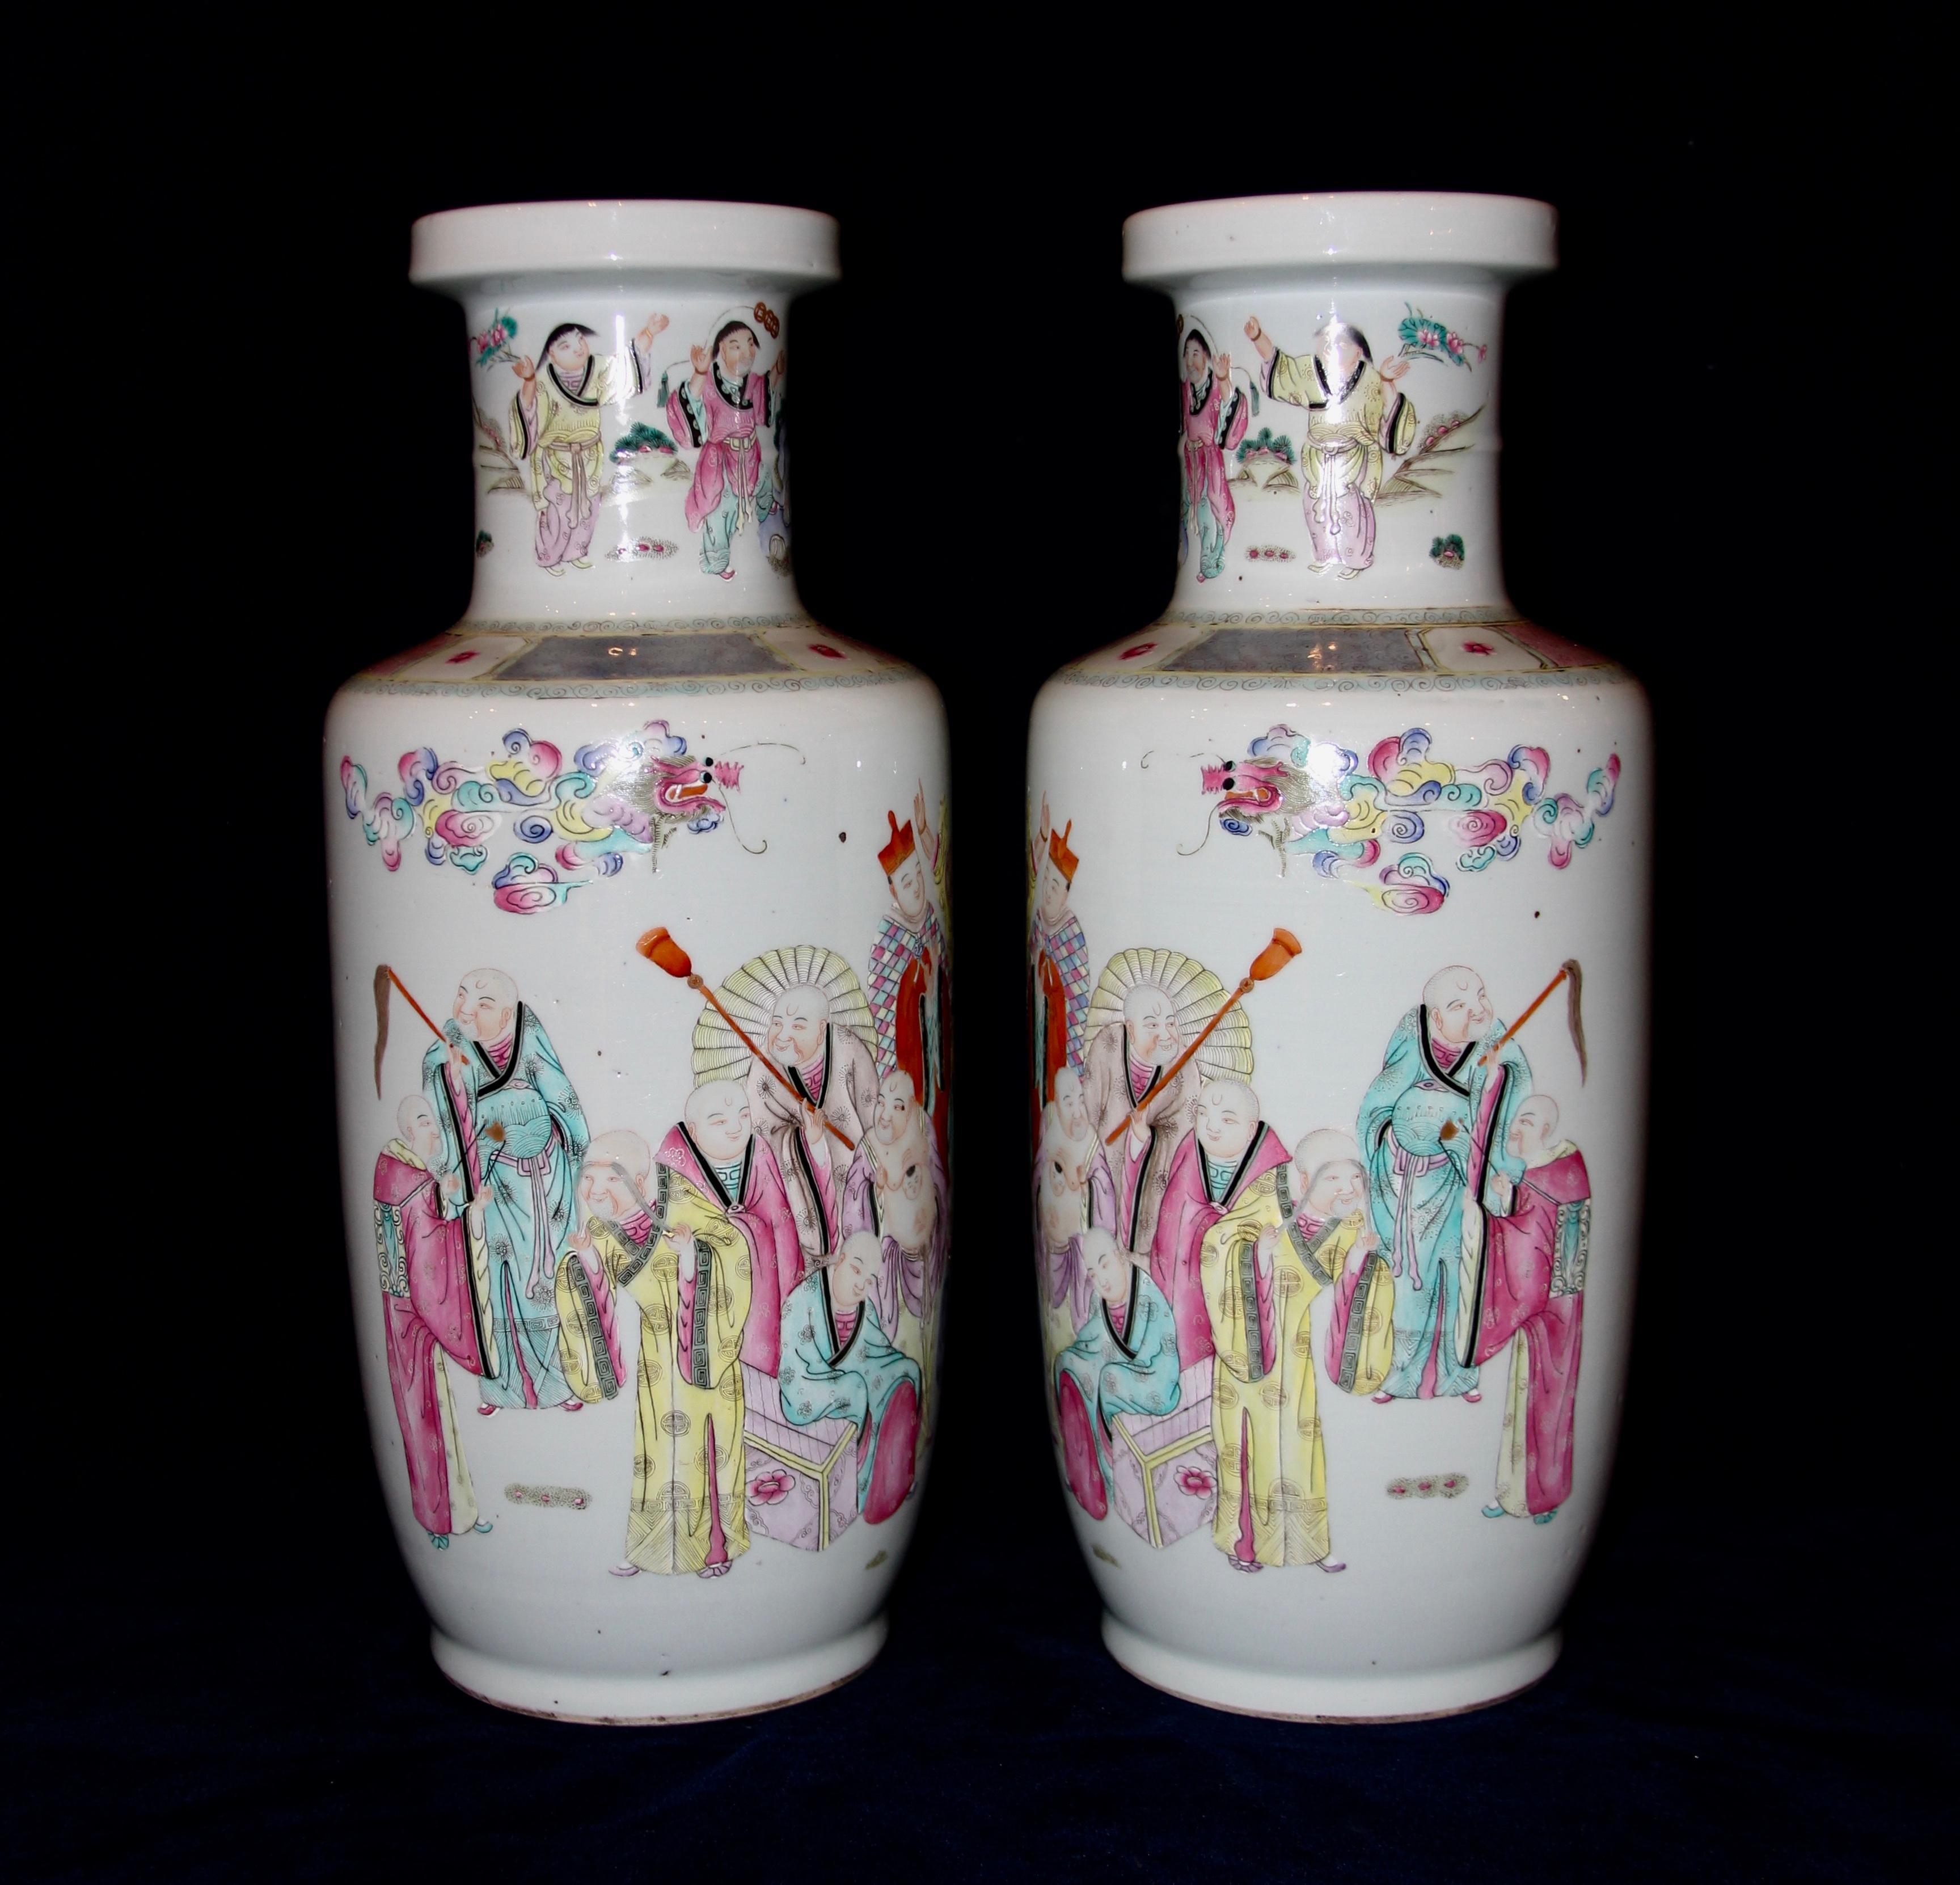 A fabulous pair of antique Bangchuiping, 'Rouleau' Chinese Famille Rose vases with hand painted Luohans figures. Each vase is of Rouleau form with gorgeous eighteen Arhats or Luohans hand painted decoration. The fabulous Luohans are exceptionally